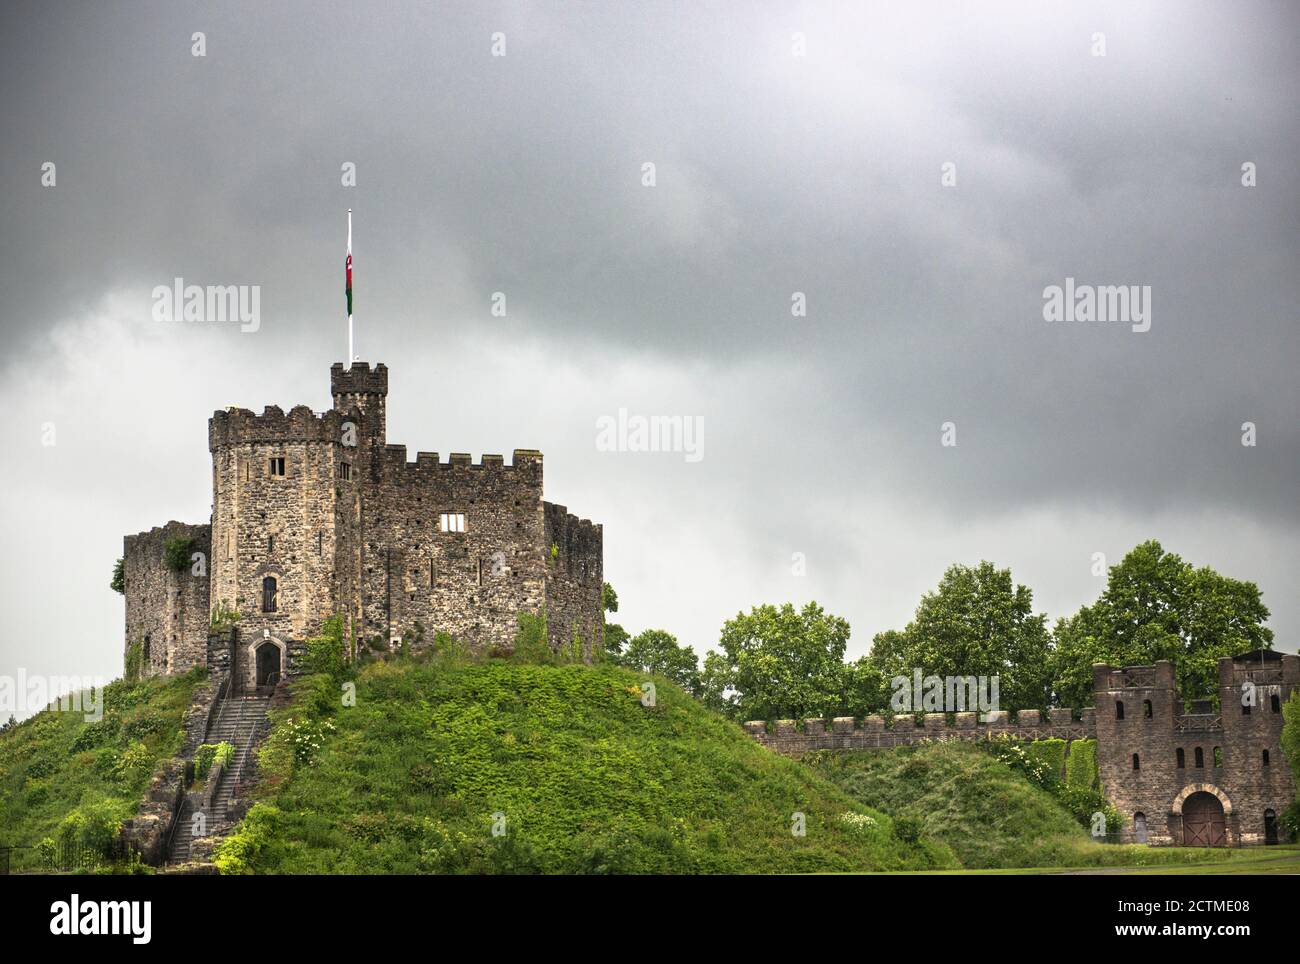 Cardiff Castle ruins and curtain wall on a gloomy, spooky rainy day. Wales, England. Castell Caerdydd. Owned by Cardiff City Council.  Copy space. Stock Photo